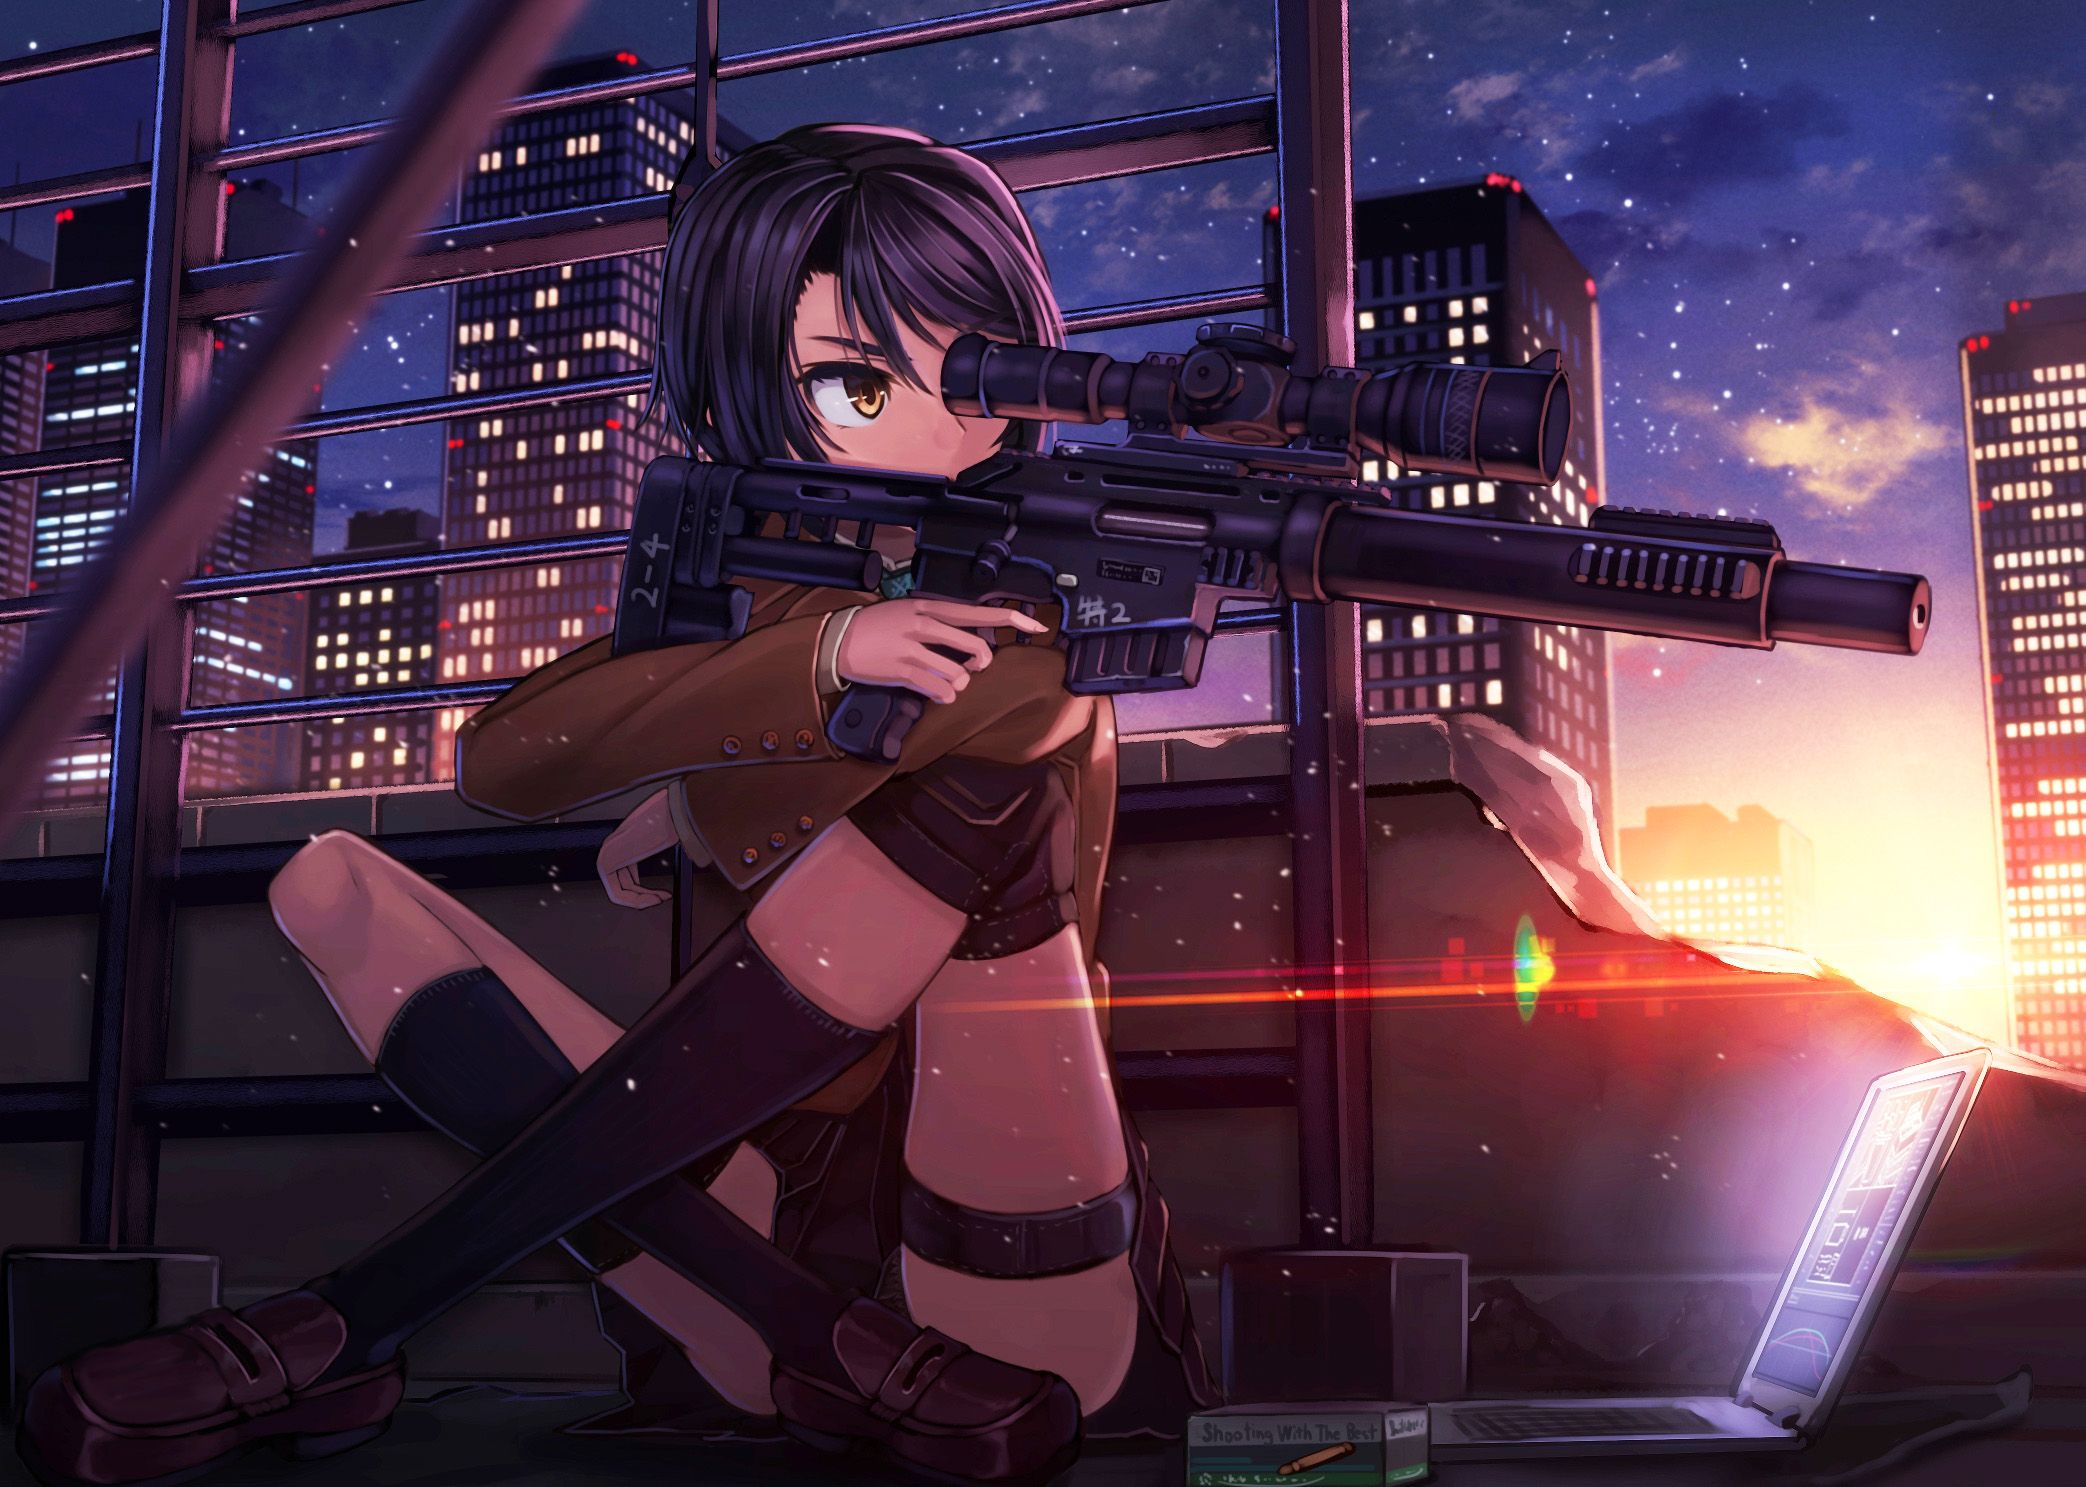 #dusk, #Girl With Weapon, #anime girls, #city, #sniper